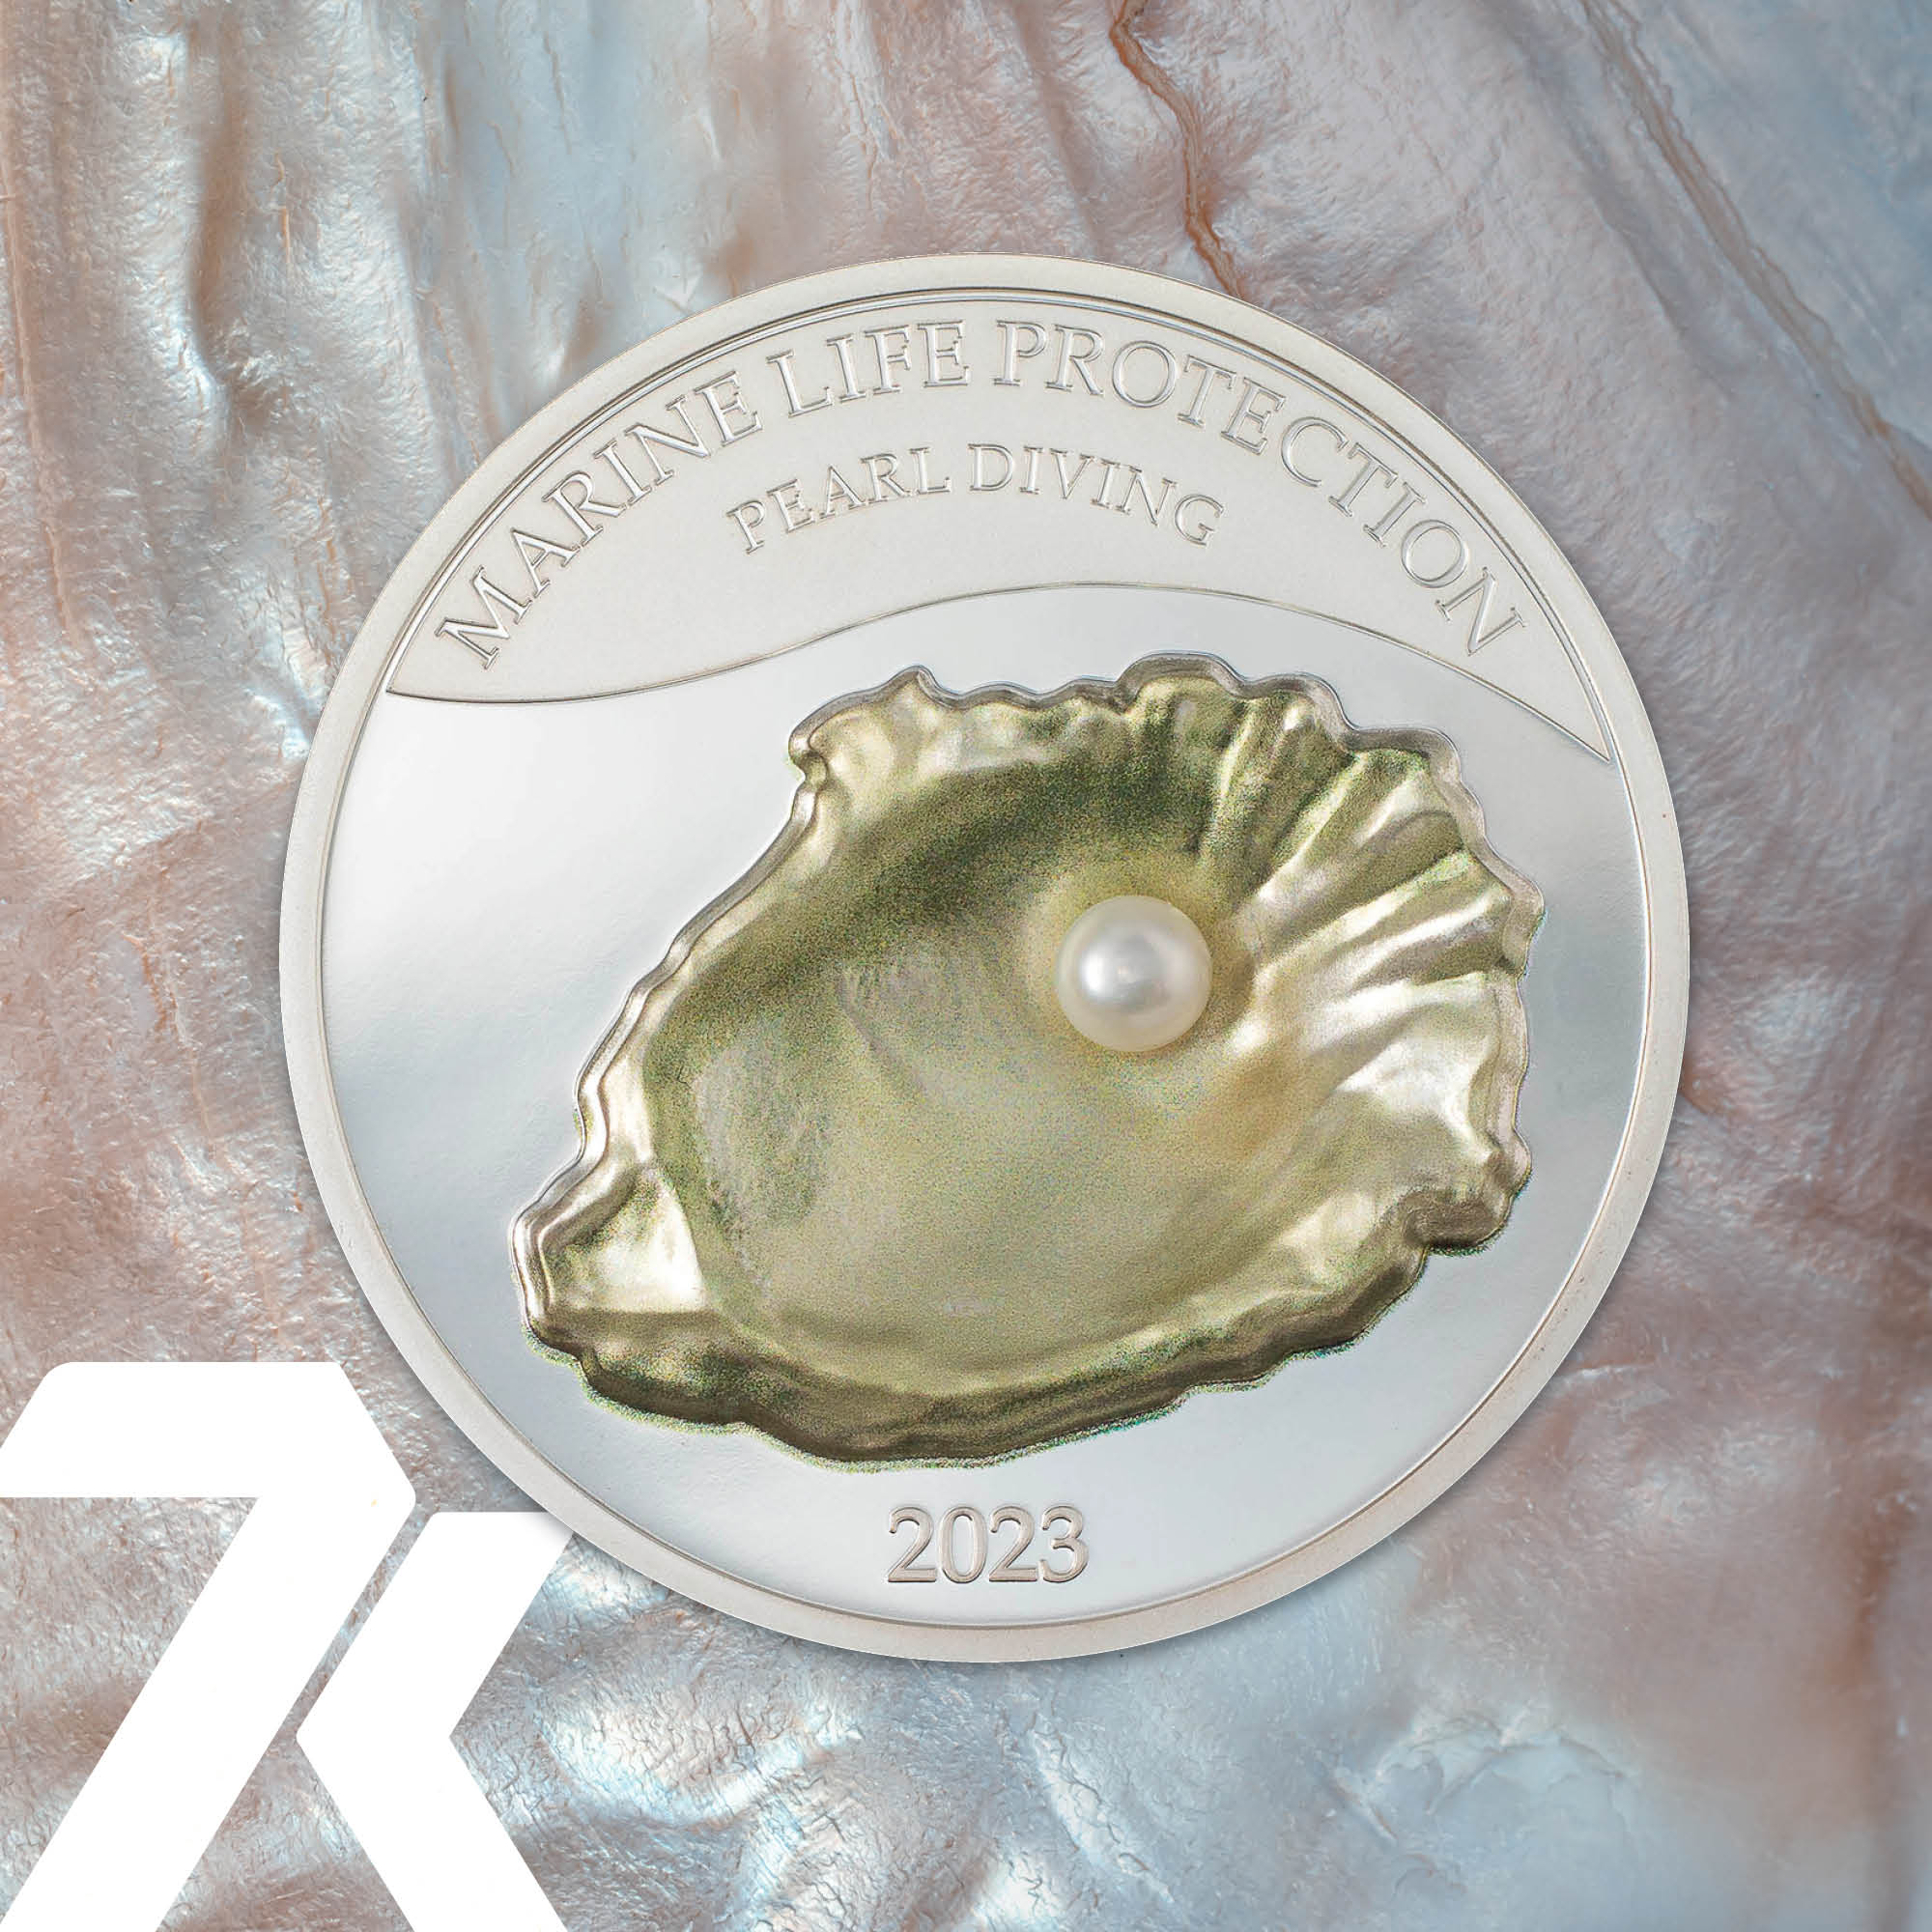 2023 Pearls of the Sea Pearl Diving 2 oz Silver Coin